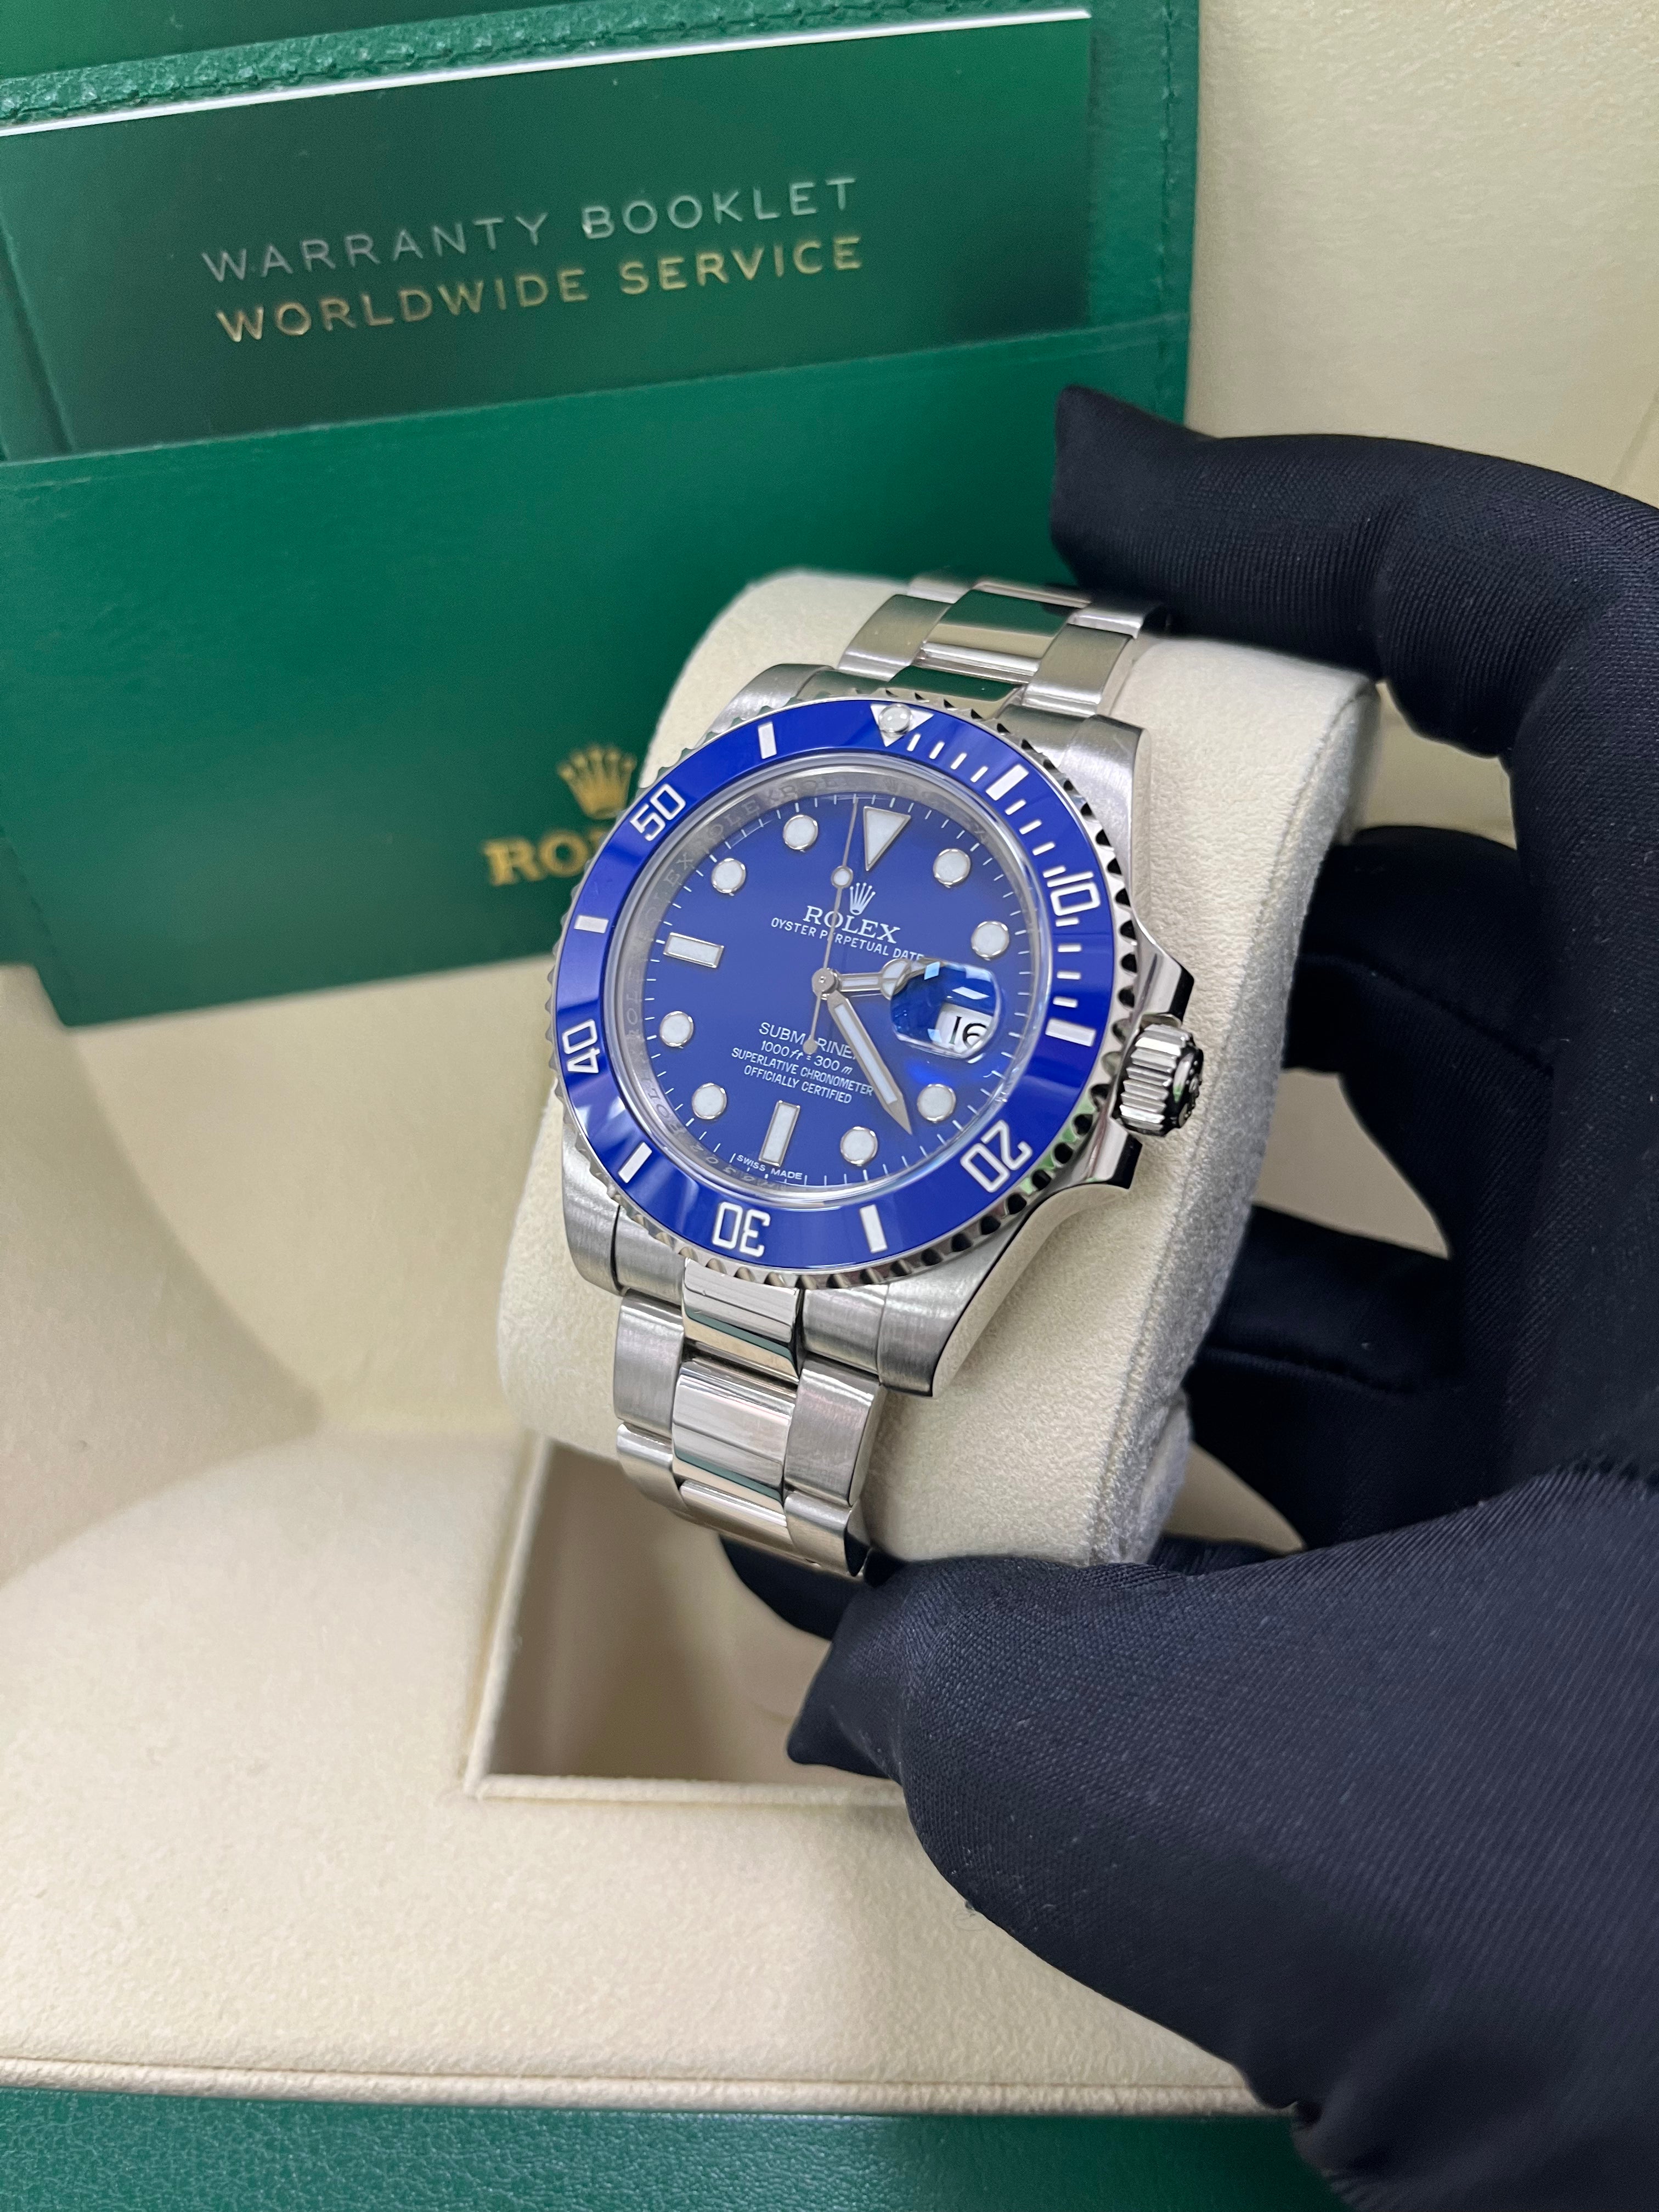 Rolex Submariner Date 40mm White Gold Blue Dial Smurf (Reference 116619LB)